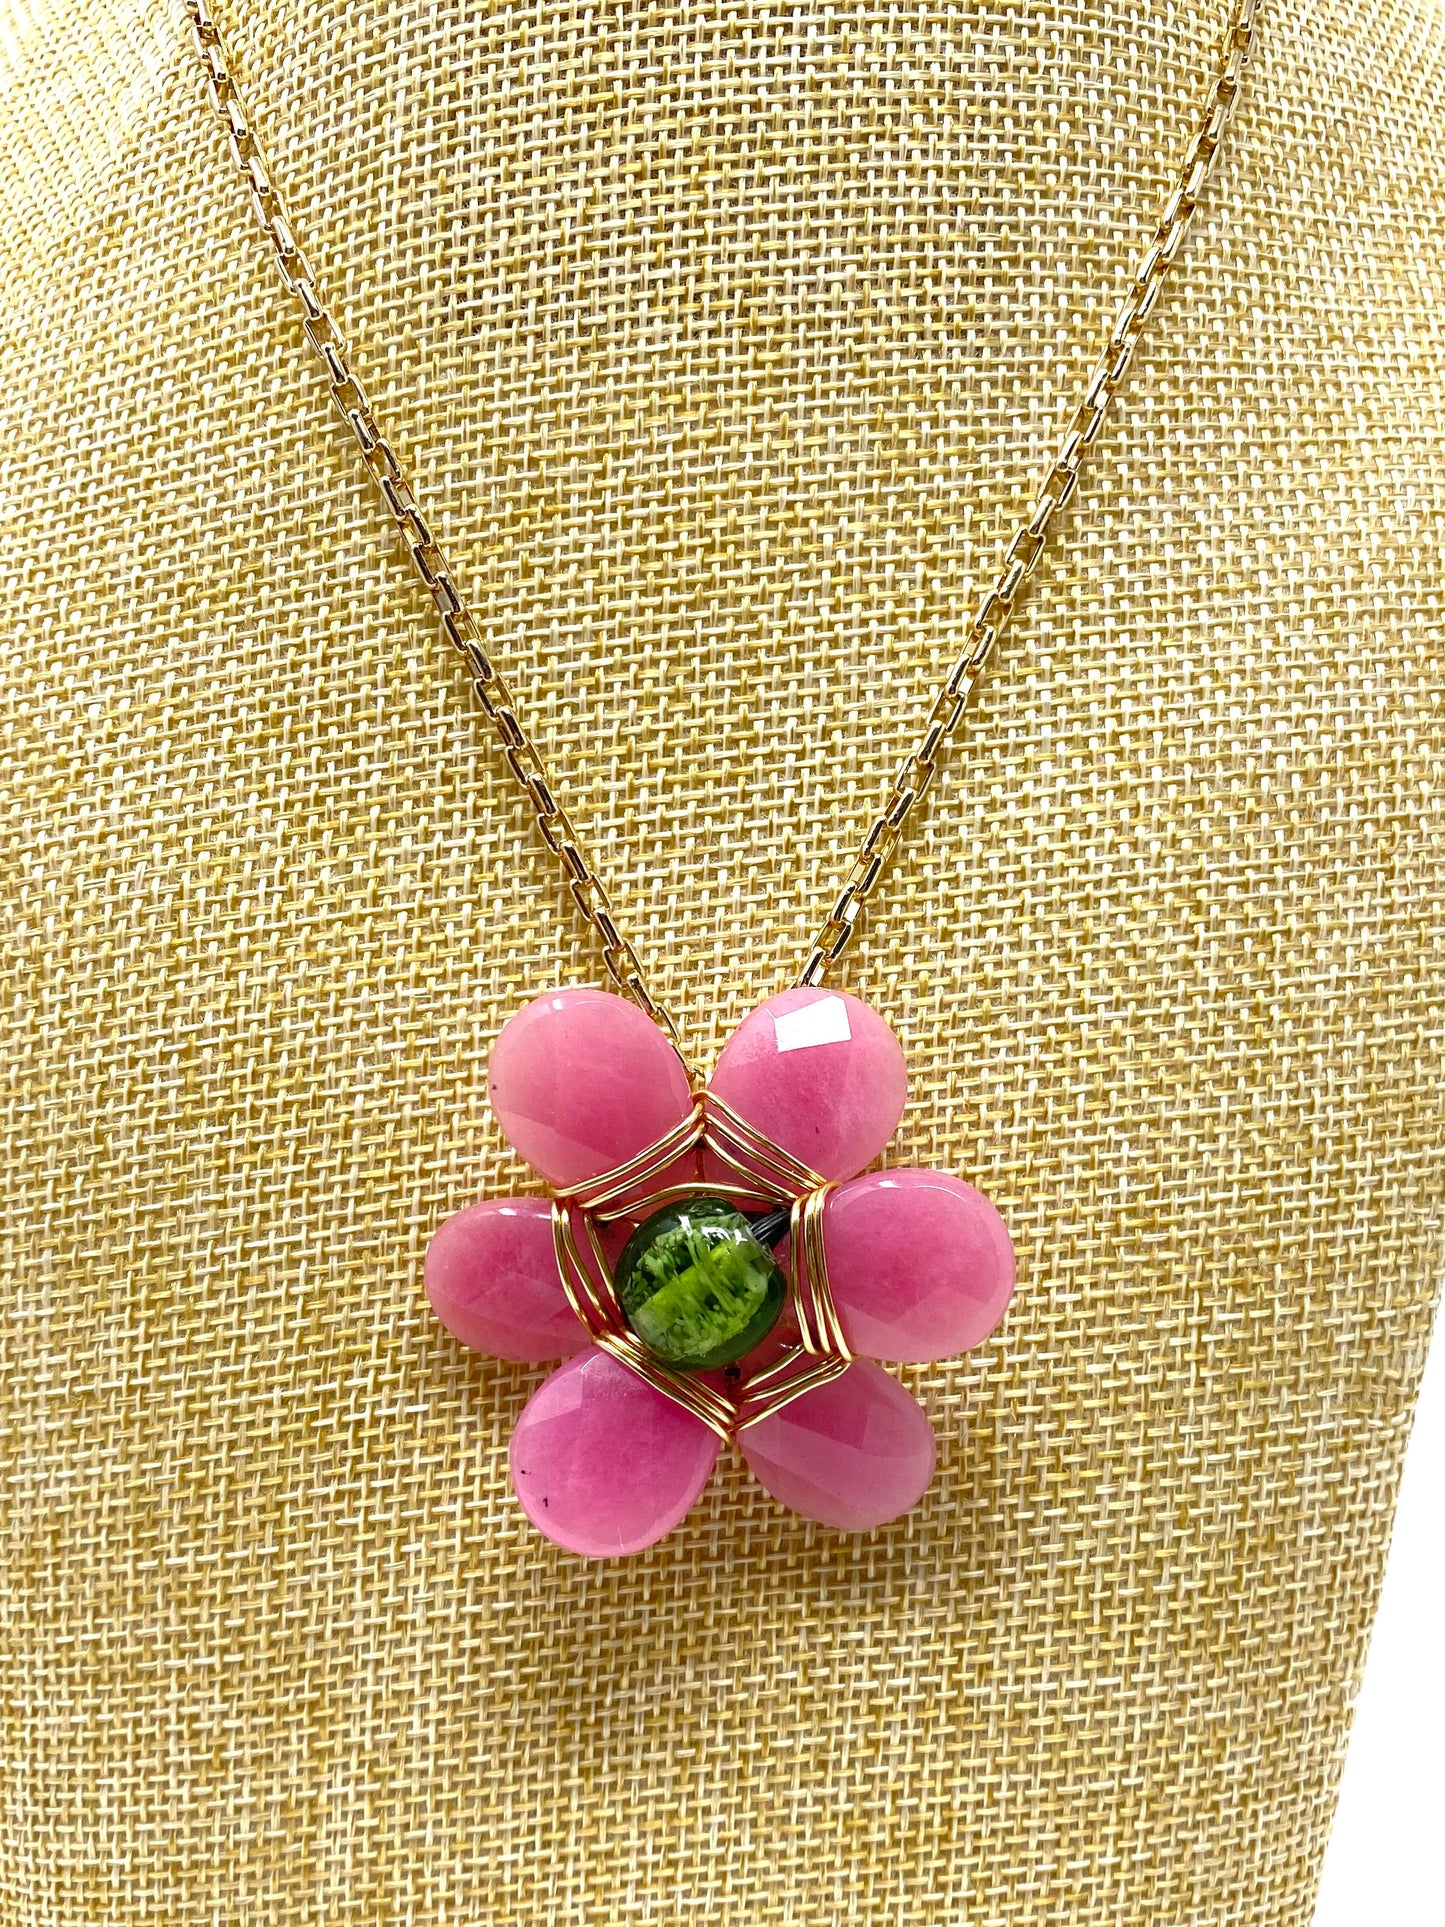 Pink and Green Flower Pendant on Gold Filled Chain Necklace